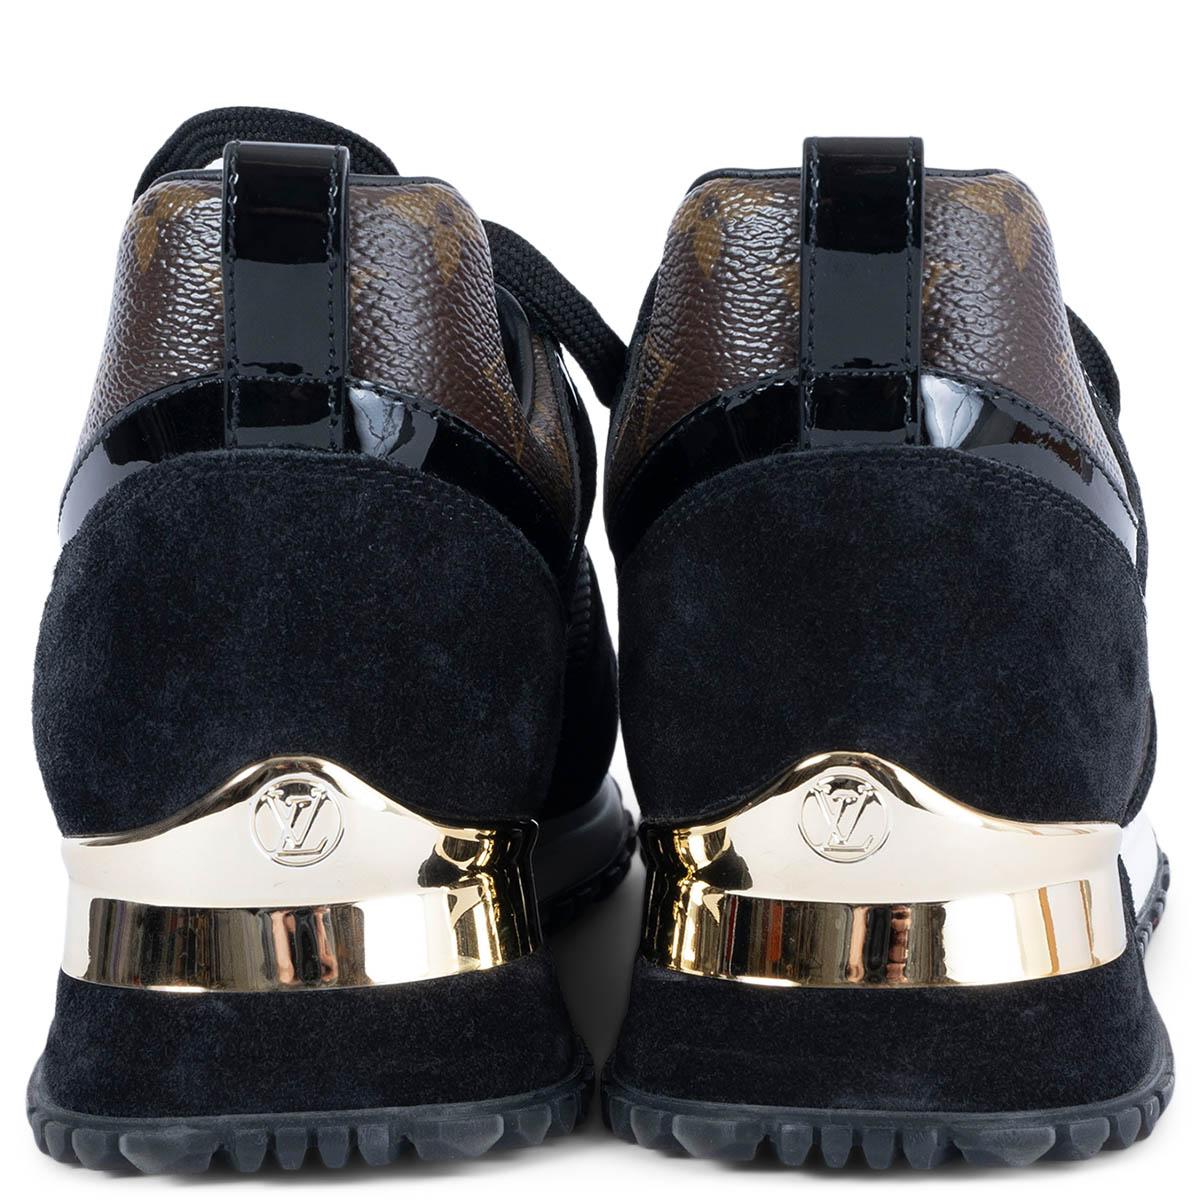 LOUIS VUITTON black suede & Monogram RUN AWAY Sneakers Shoes 37 In Excellent Condition For Sale In Zürich, CH